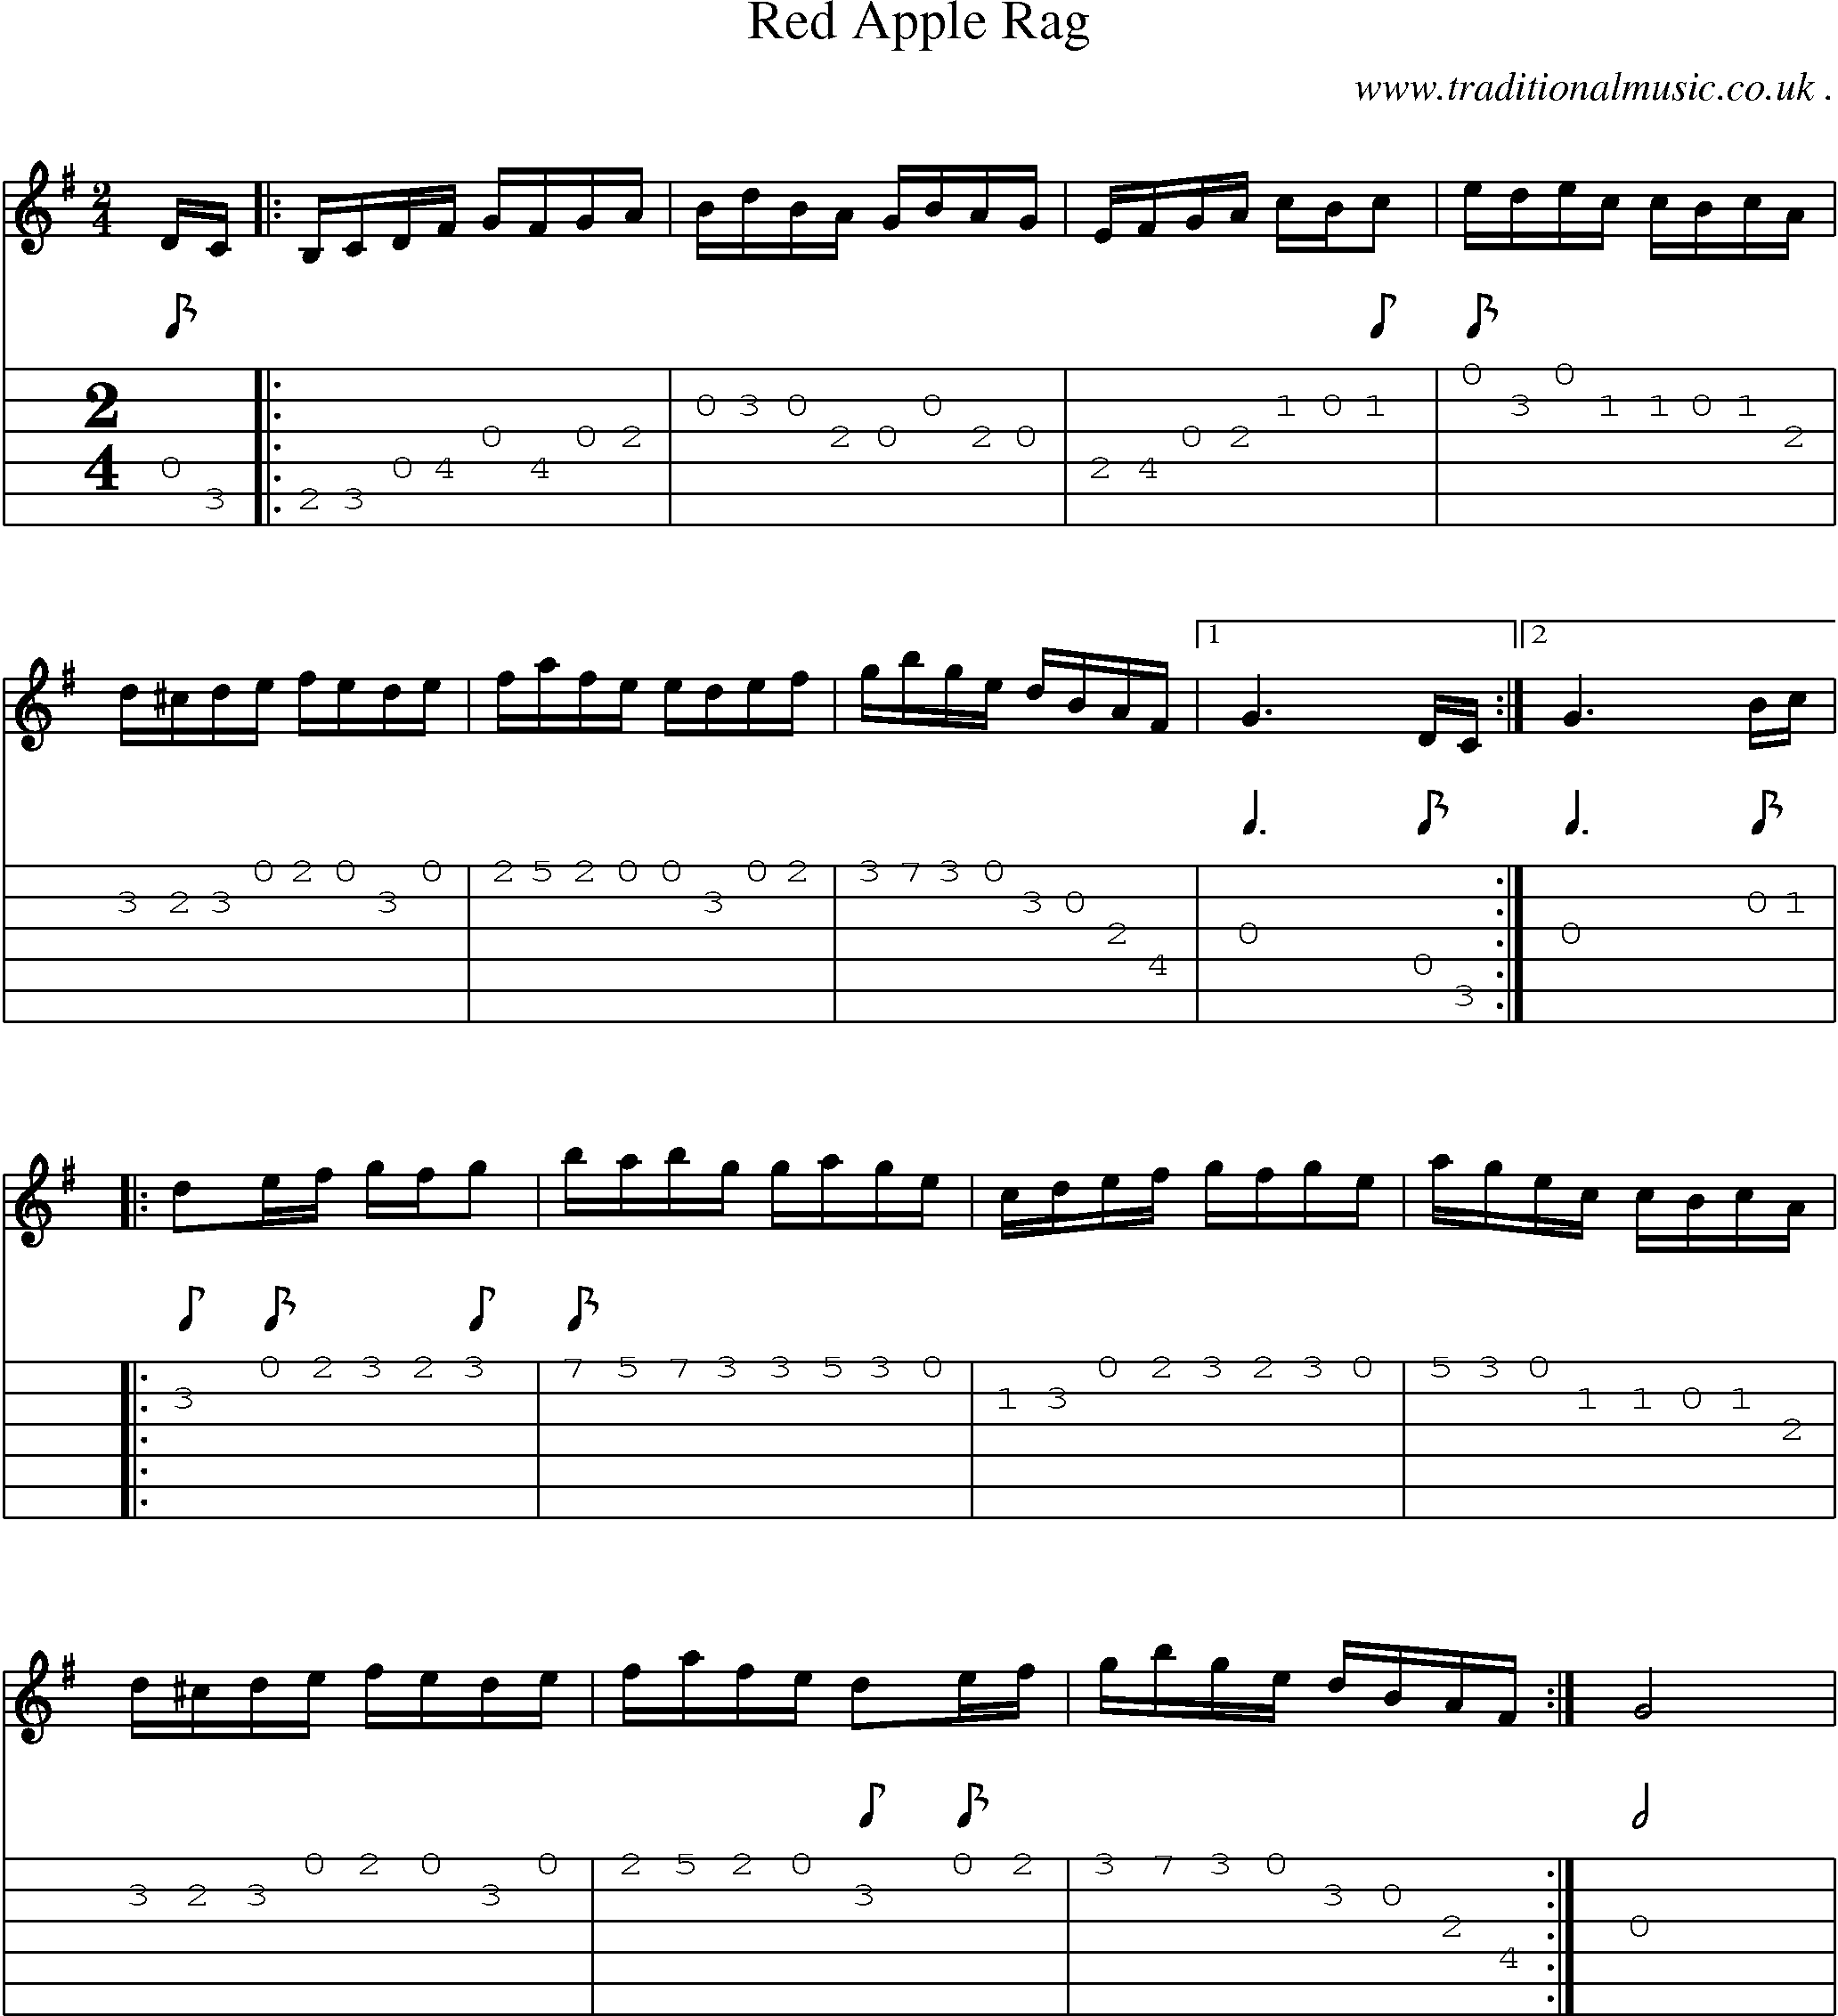 Music Score and Guitar Tabs for Red Apple Rag